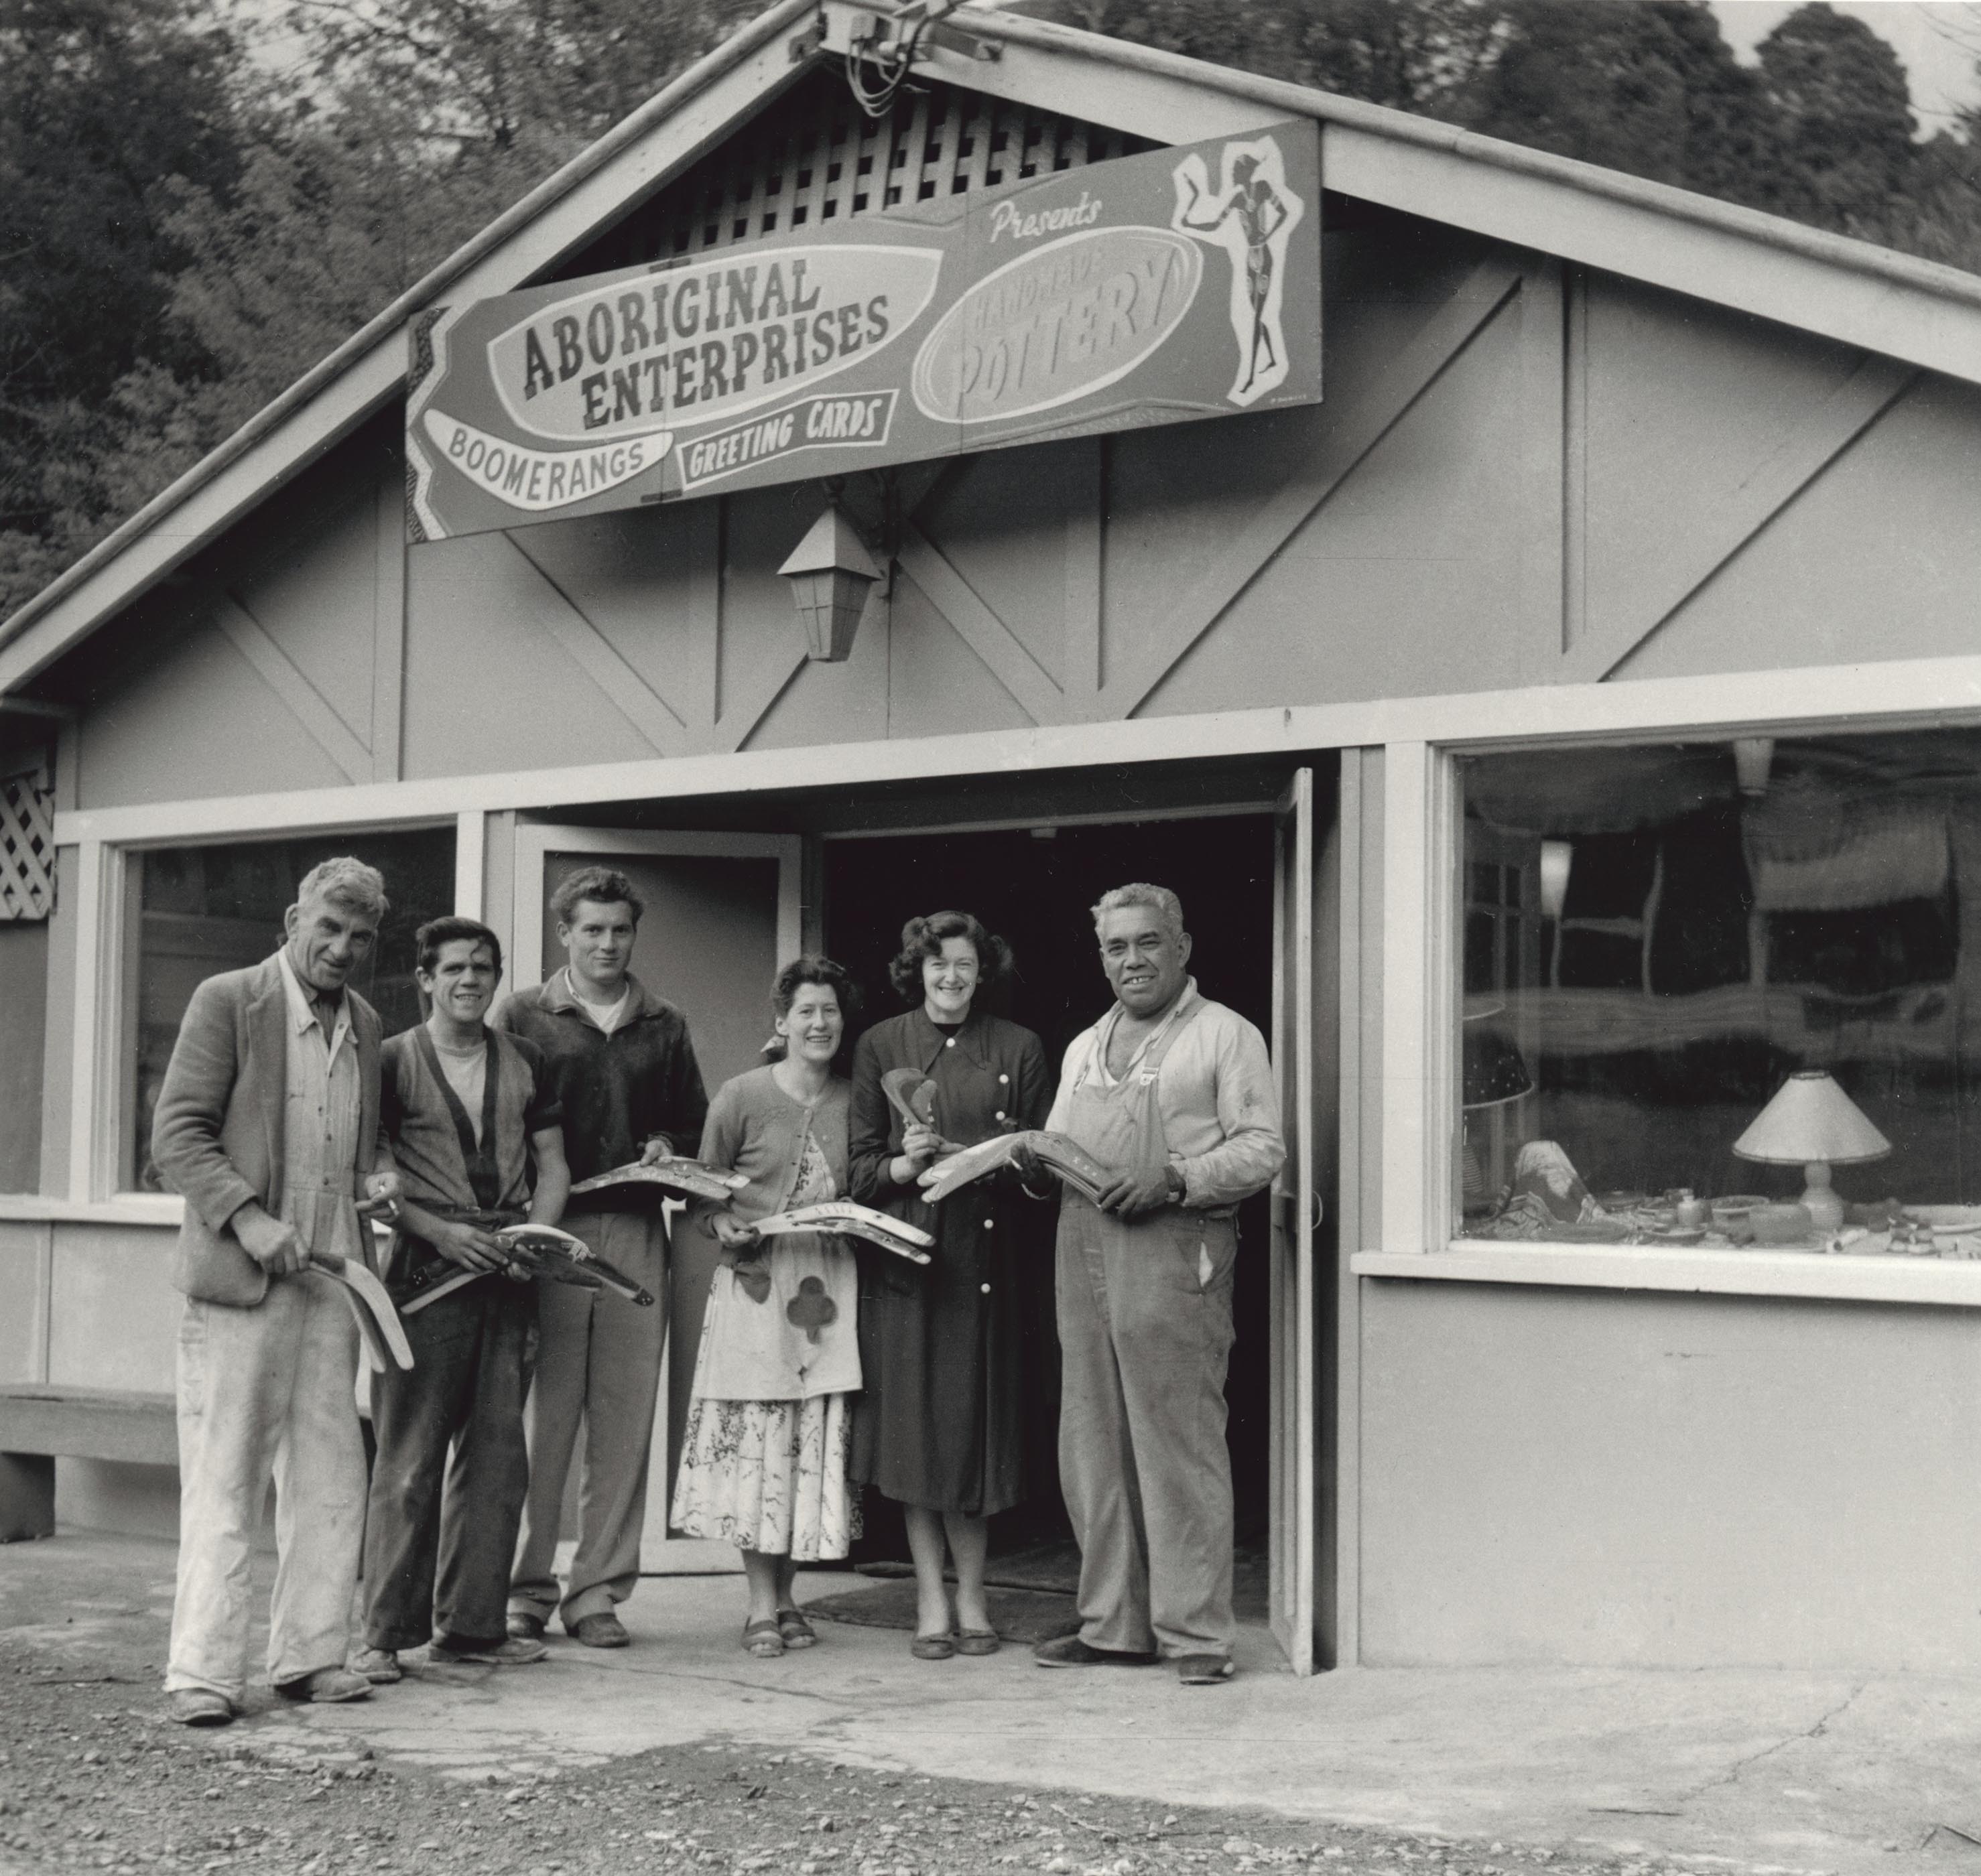 Six people standing outside a shop holding boomerangs